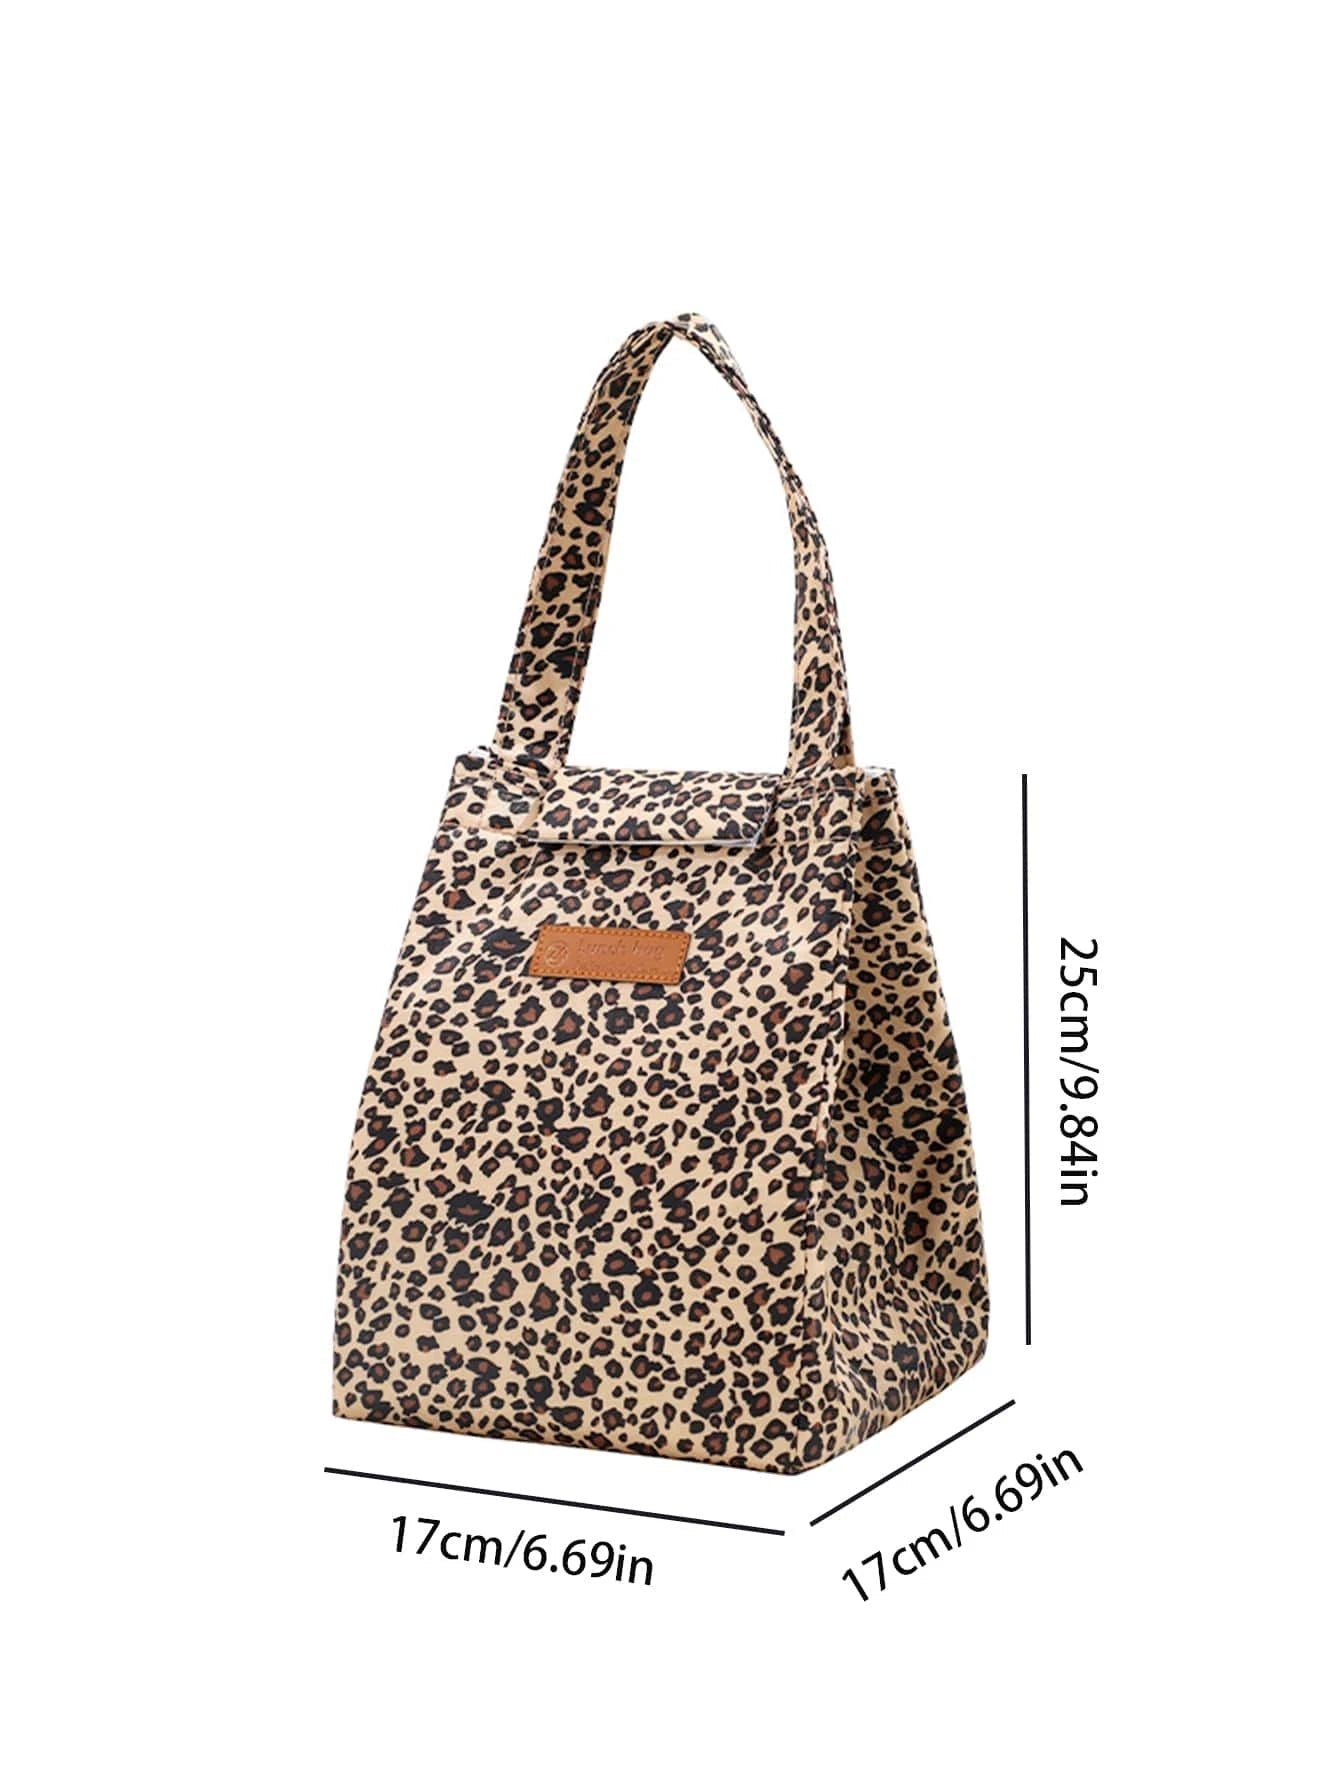 Chic & stylish insulated Lunch bag- Wild Chic